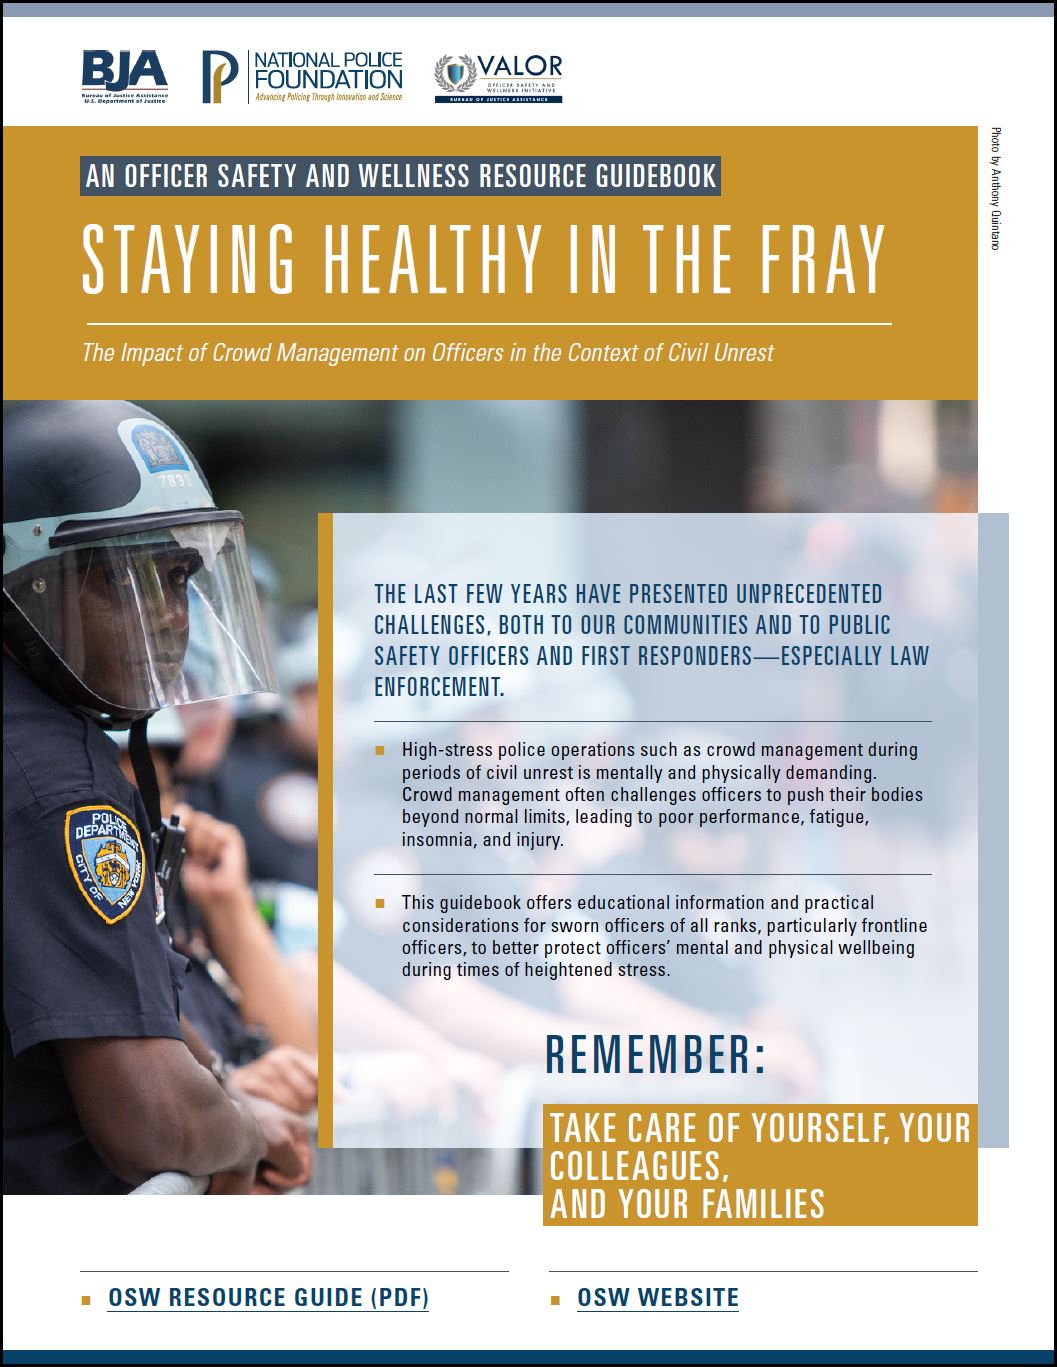 Staying healthy in the fray flyer